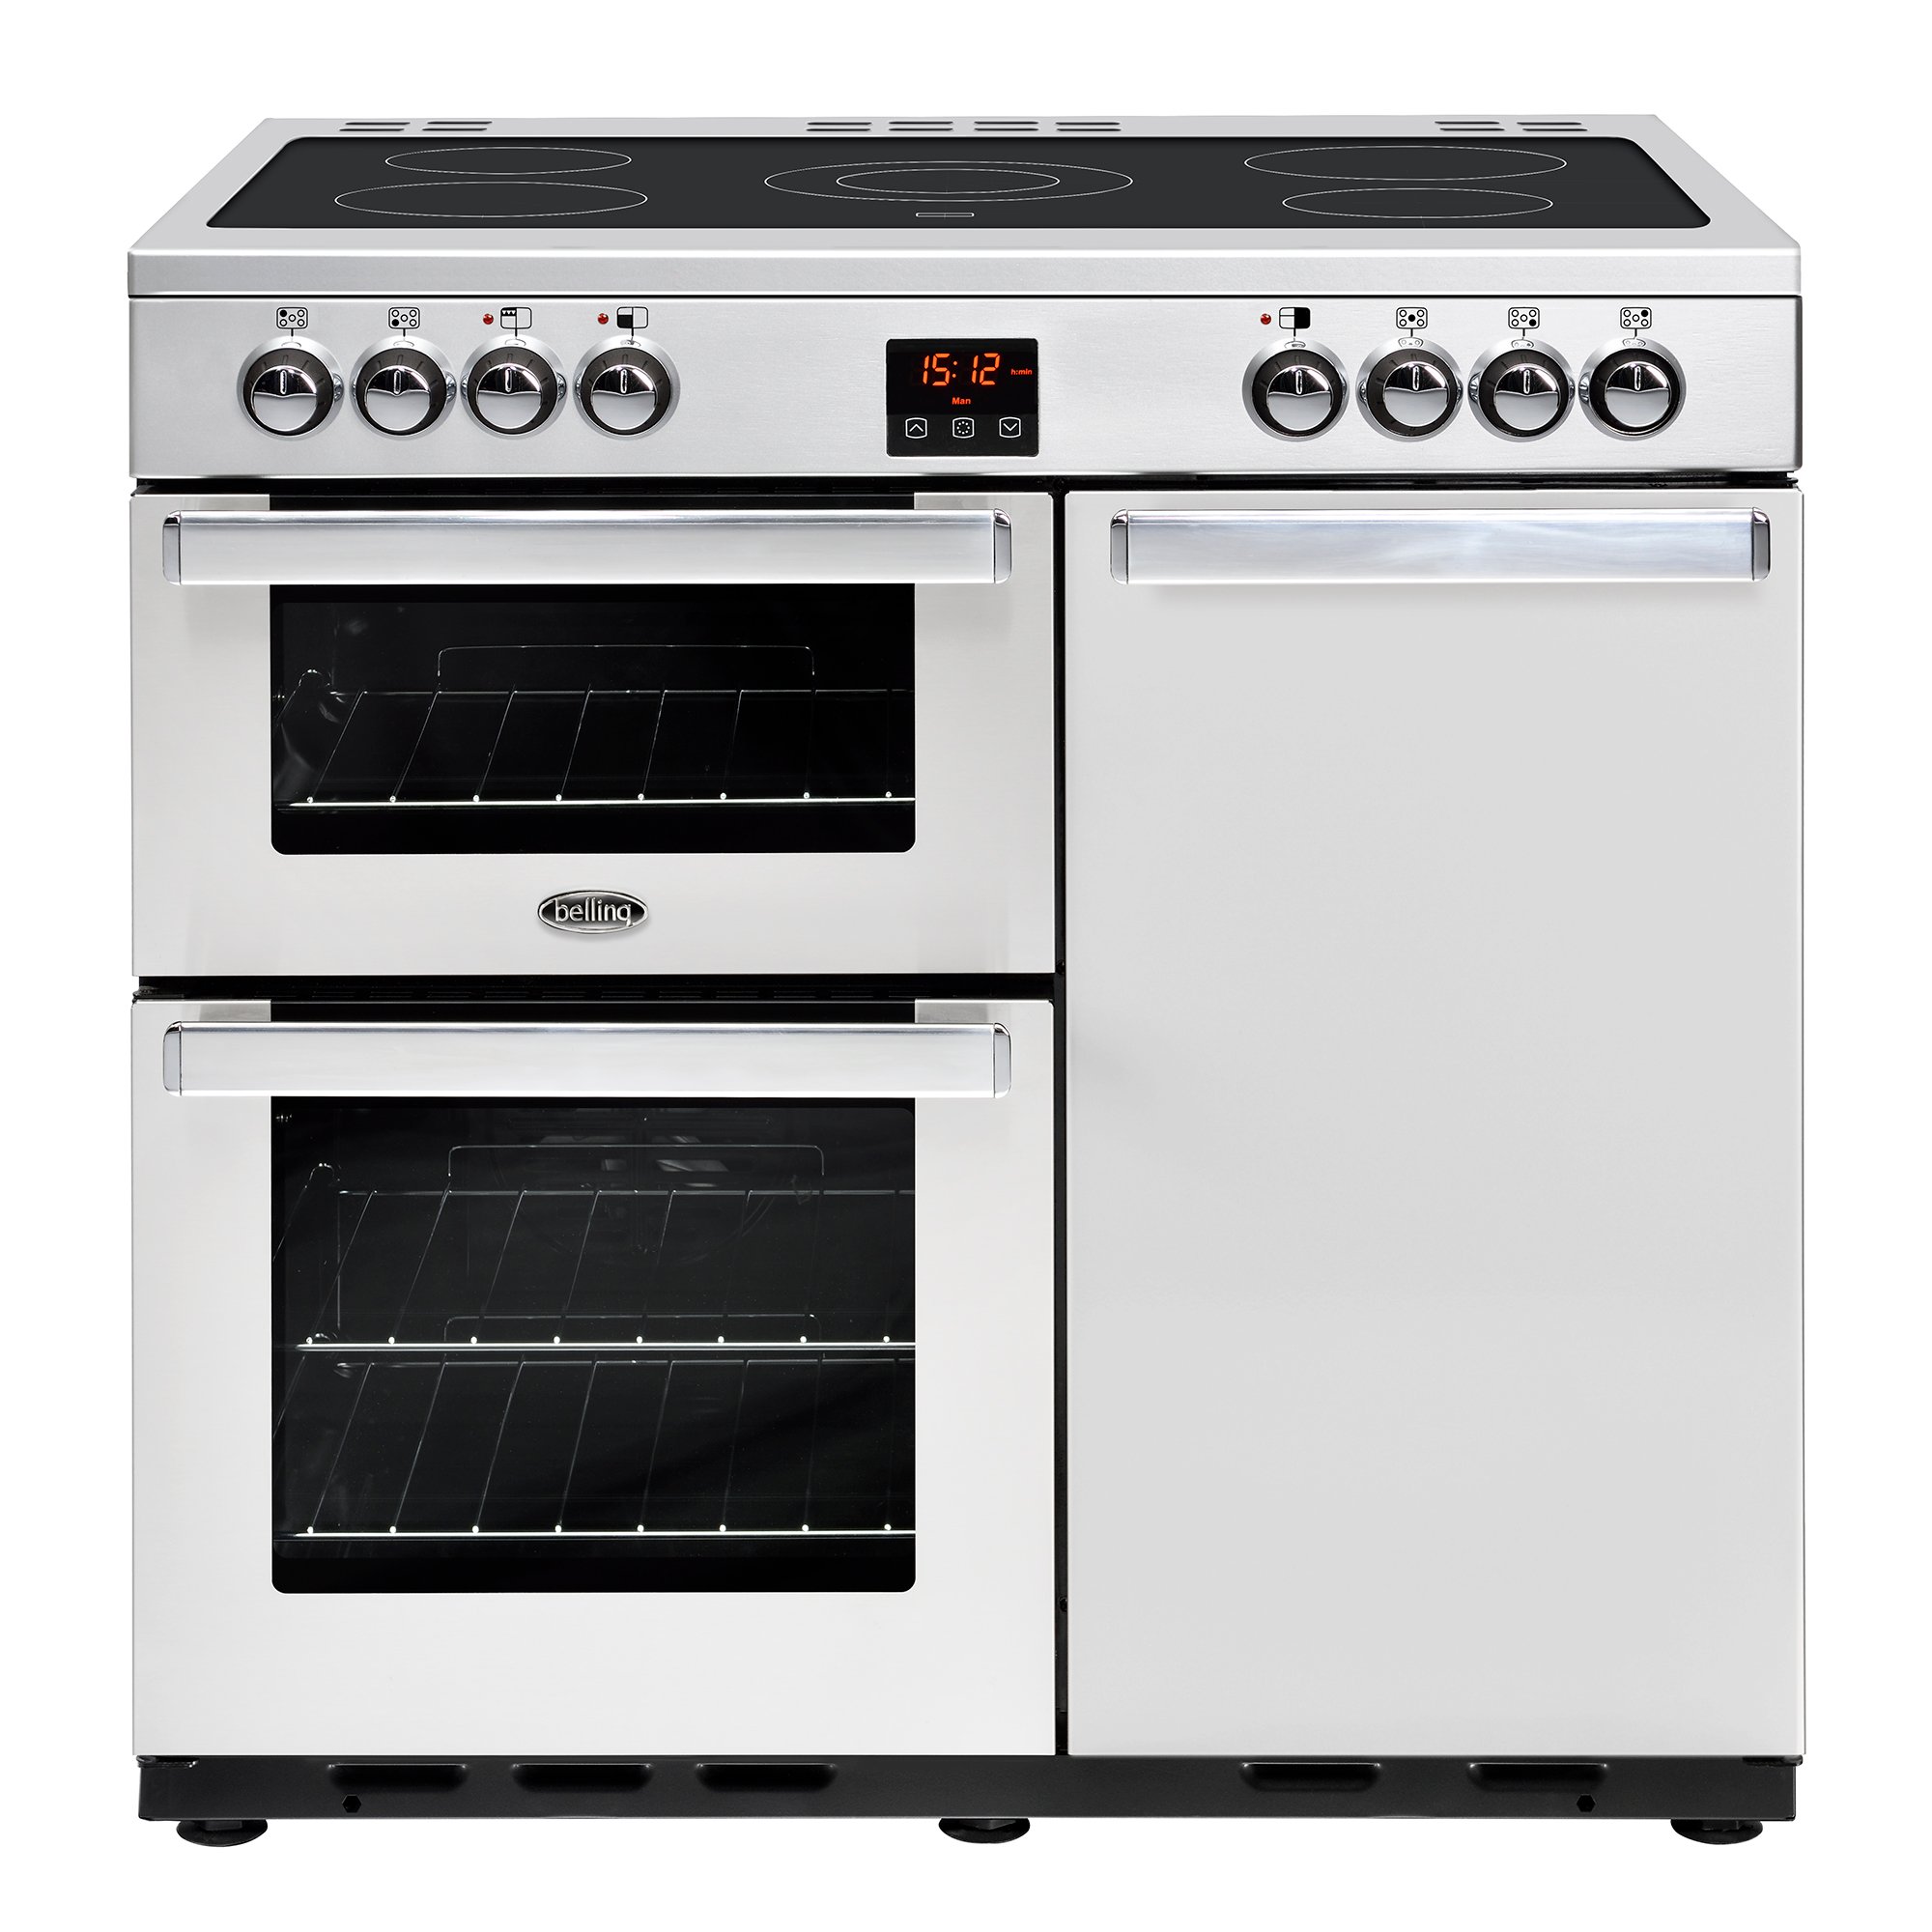 90cm electric range cooker with 5 zone ceramic hob, conventional oven & grill, main fanned electric oven and tall fanned electric oven.